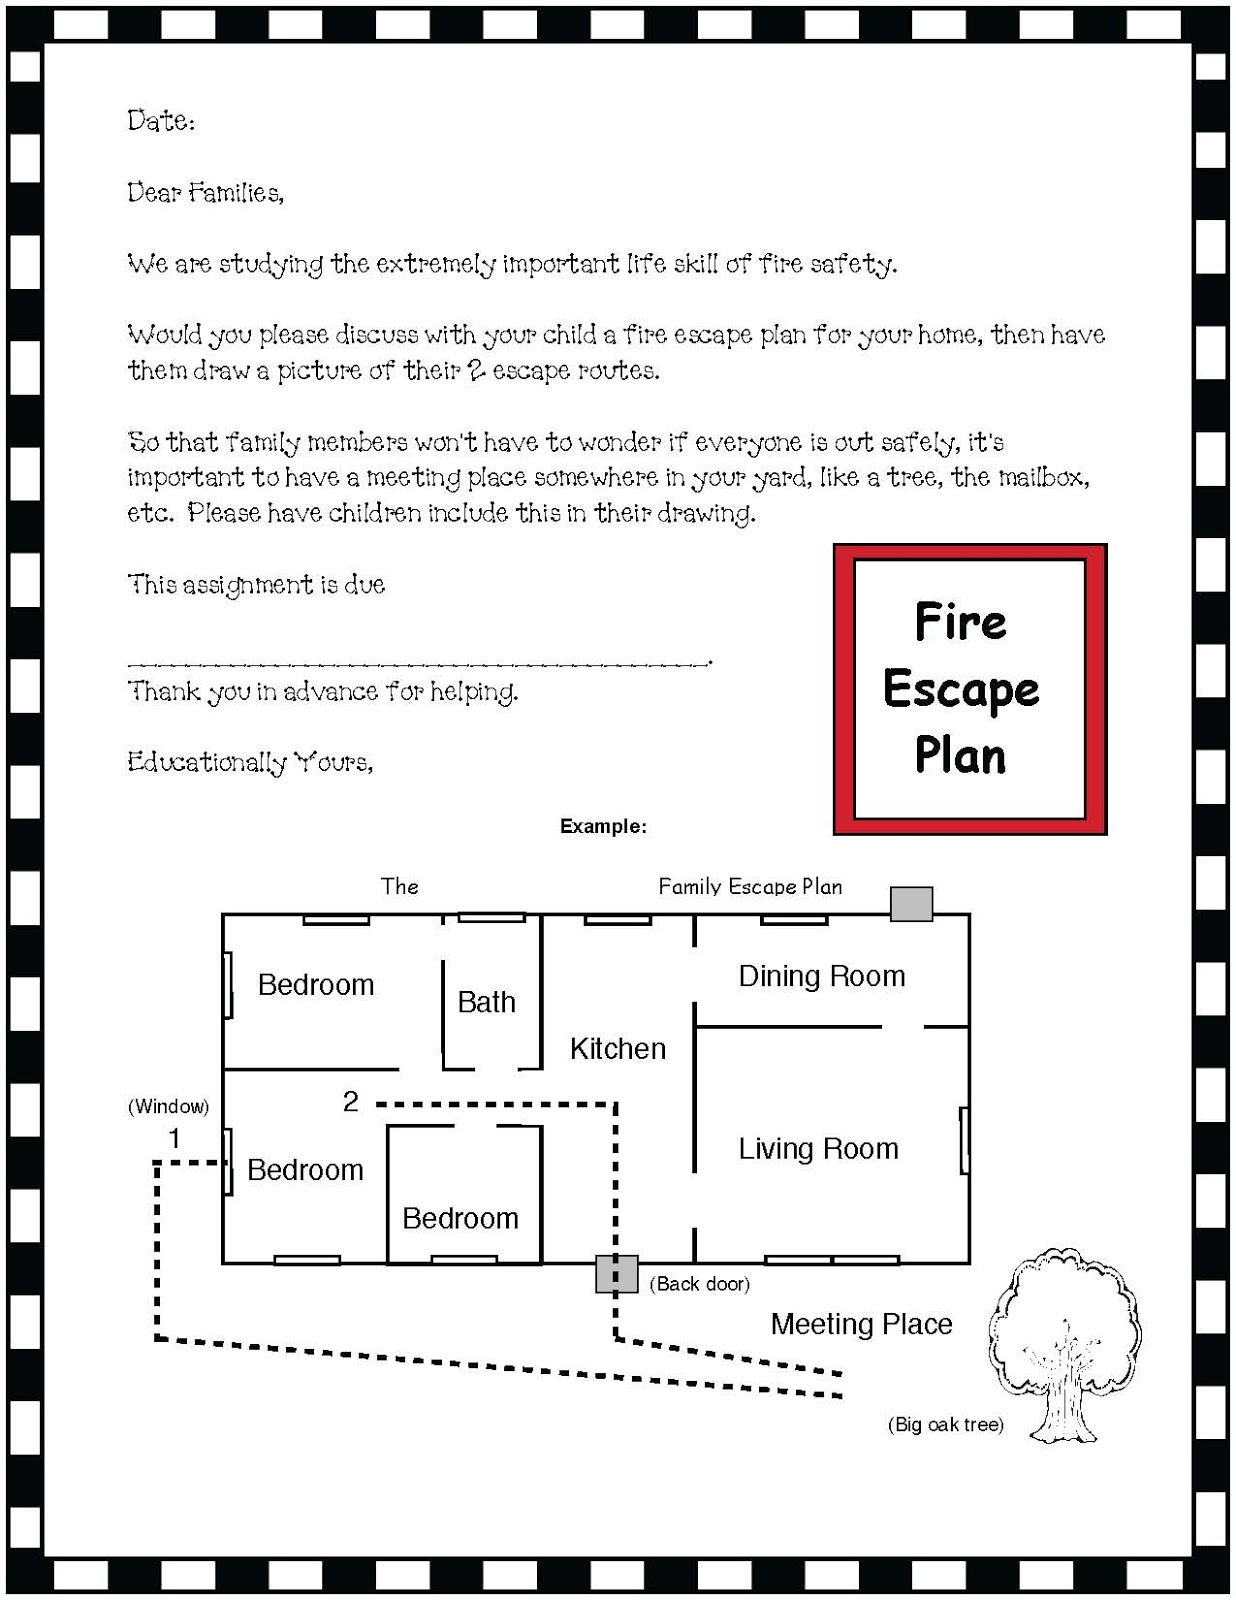 Fire Safety Escape Plan Classroom Freebies